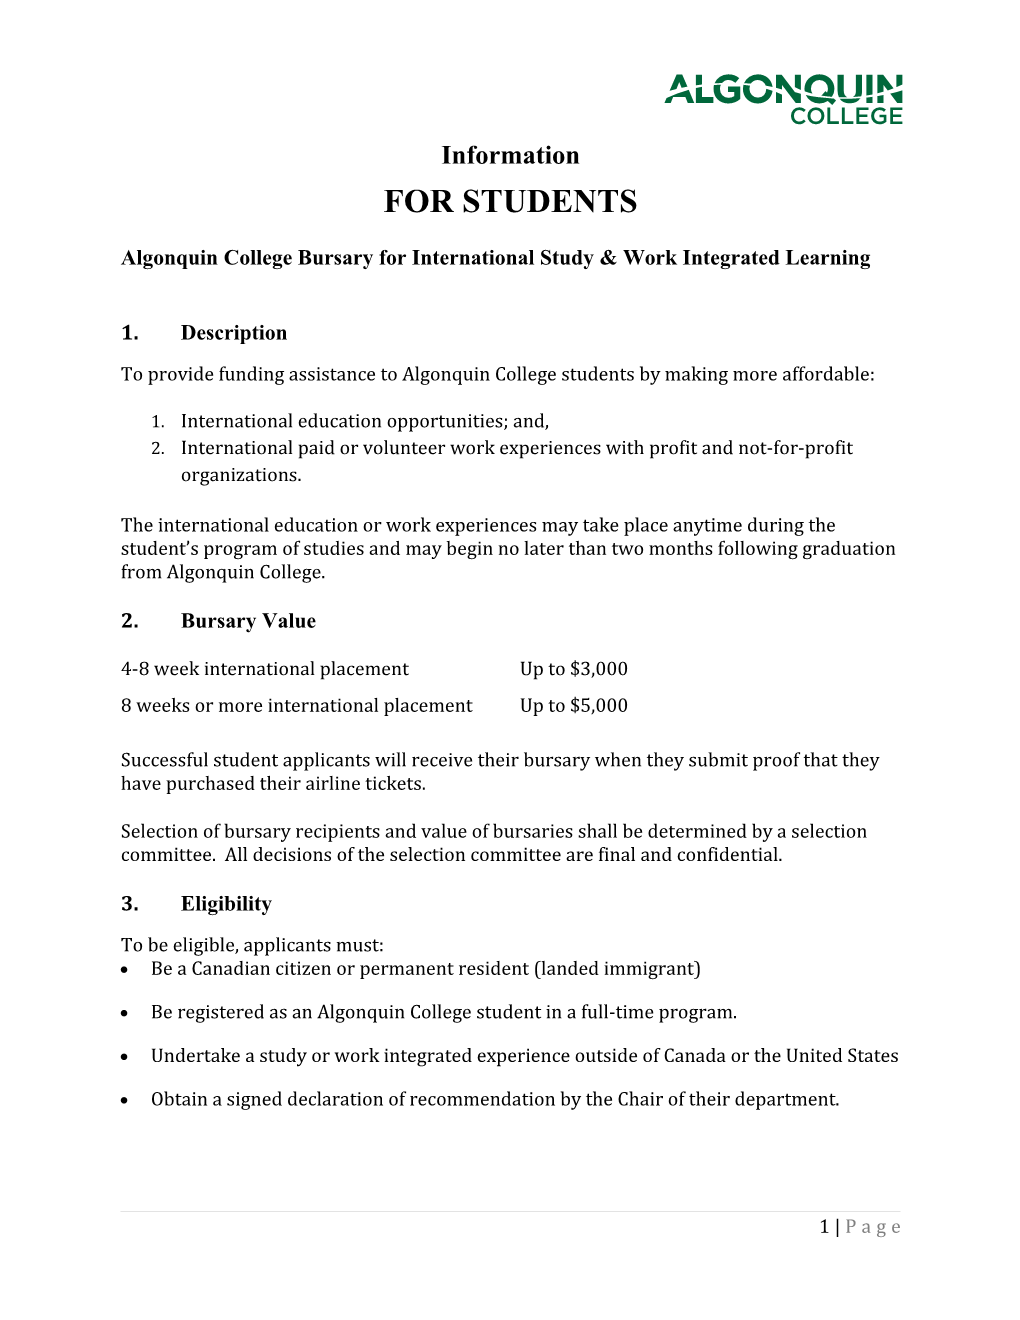 Algonquin College Bursary for International Study & Work Integrated Learning